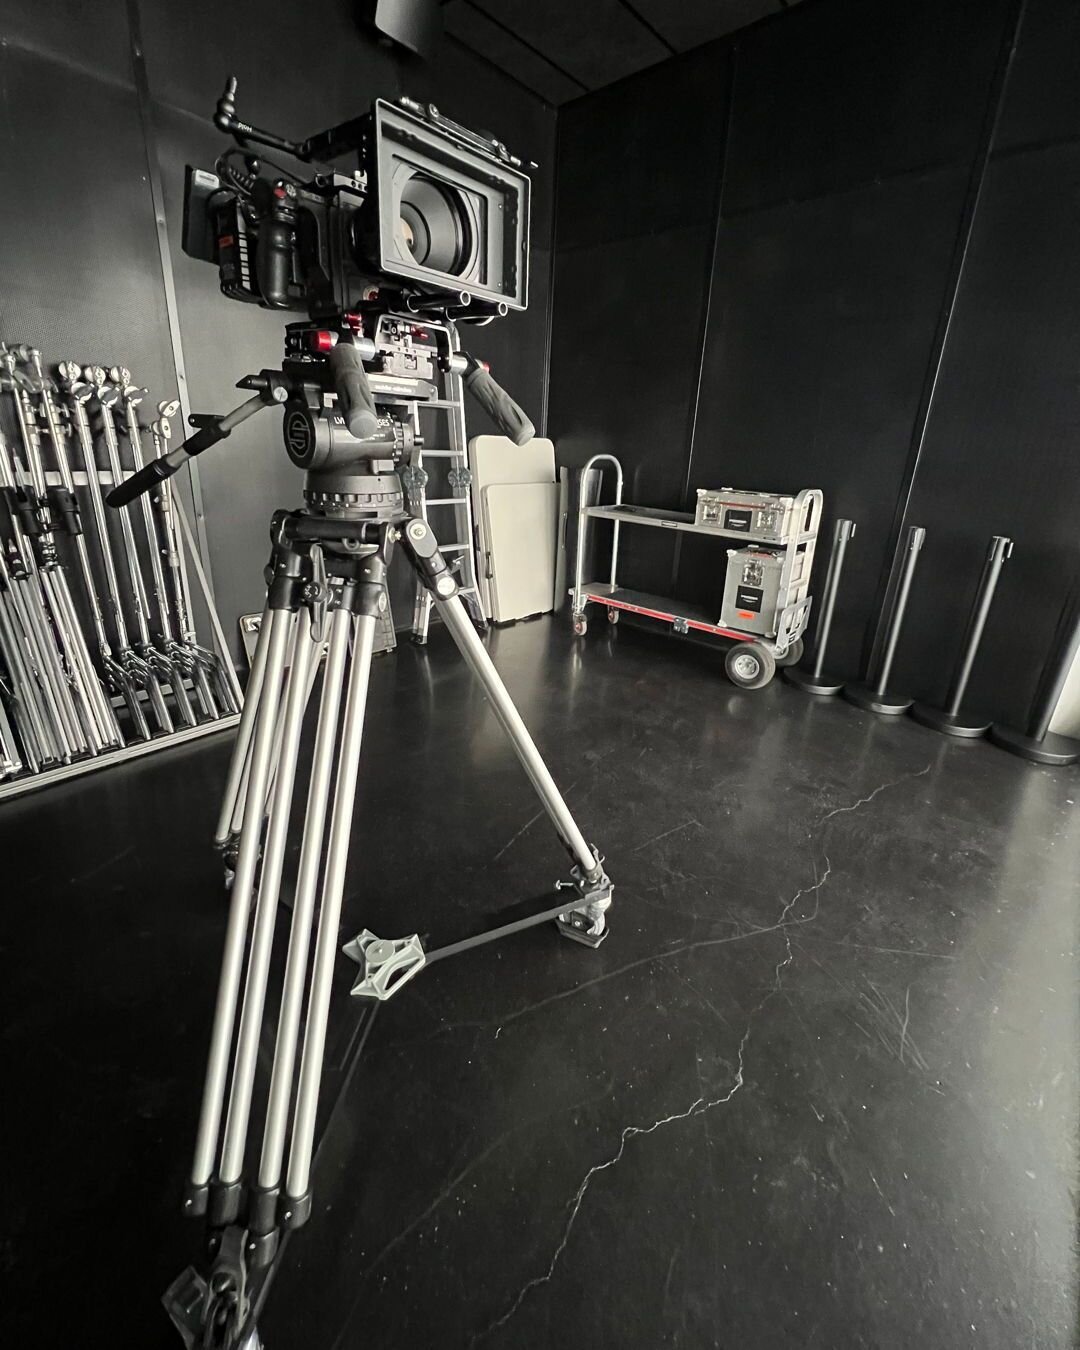 Happy Tuesday! Locked and loaded for another studio shoot with the 8K RED HELIUM and Canon Cine Lens Kit.

* 8K RED CINEMA Camera 
* Canon Cine Lens Kit
* Studio Shoot
* 150mm Tripod Legs with 9+9 Sachtler Tripod Fluid Head (on wheels!!!)
* Pure whit